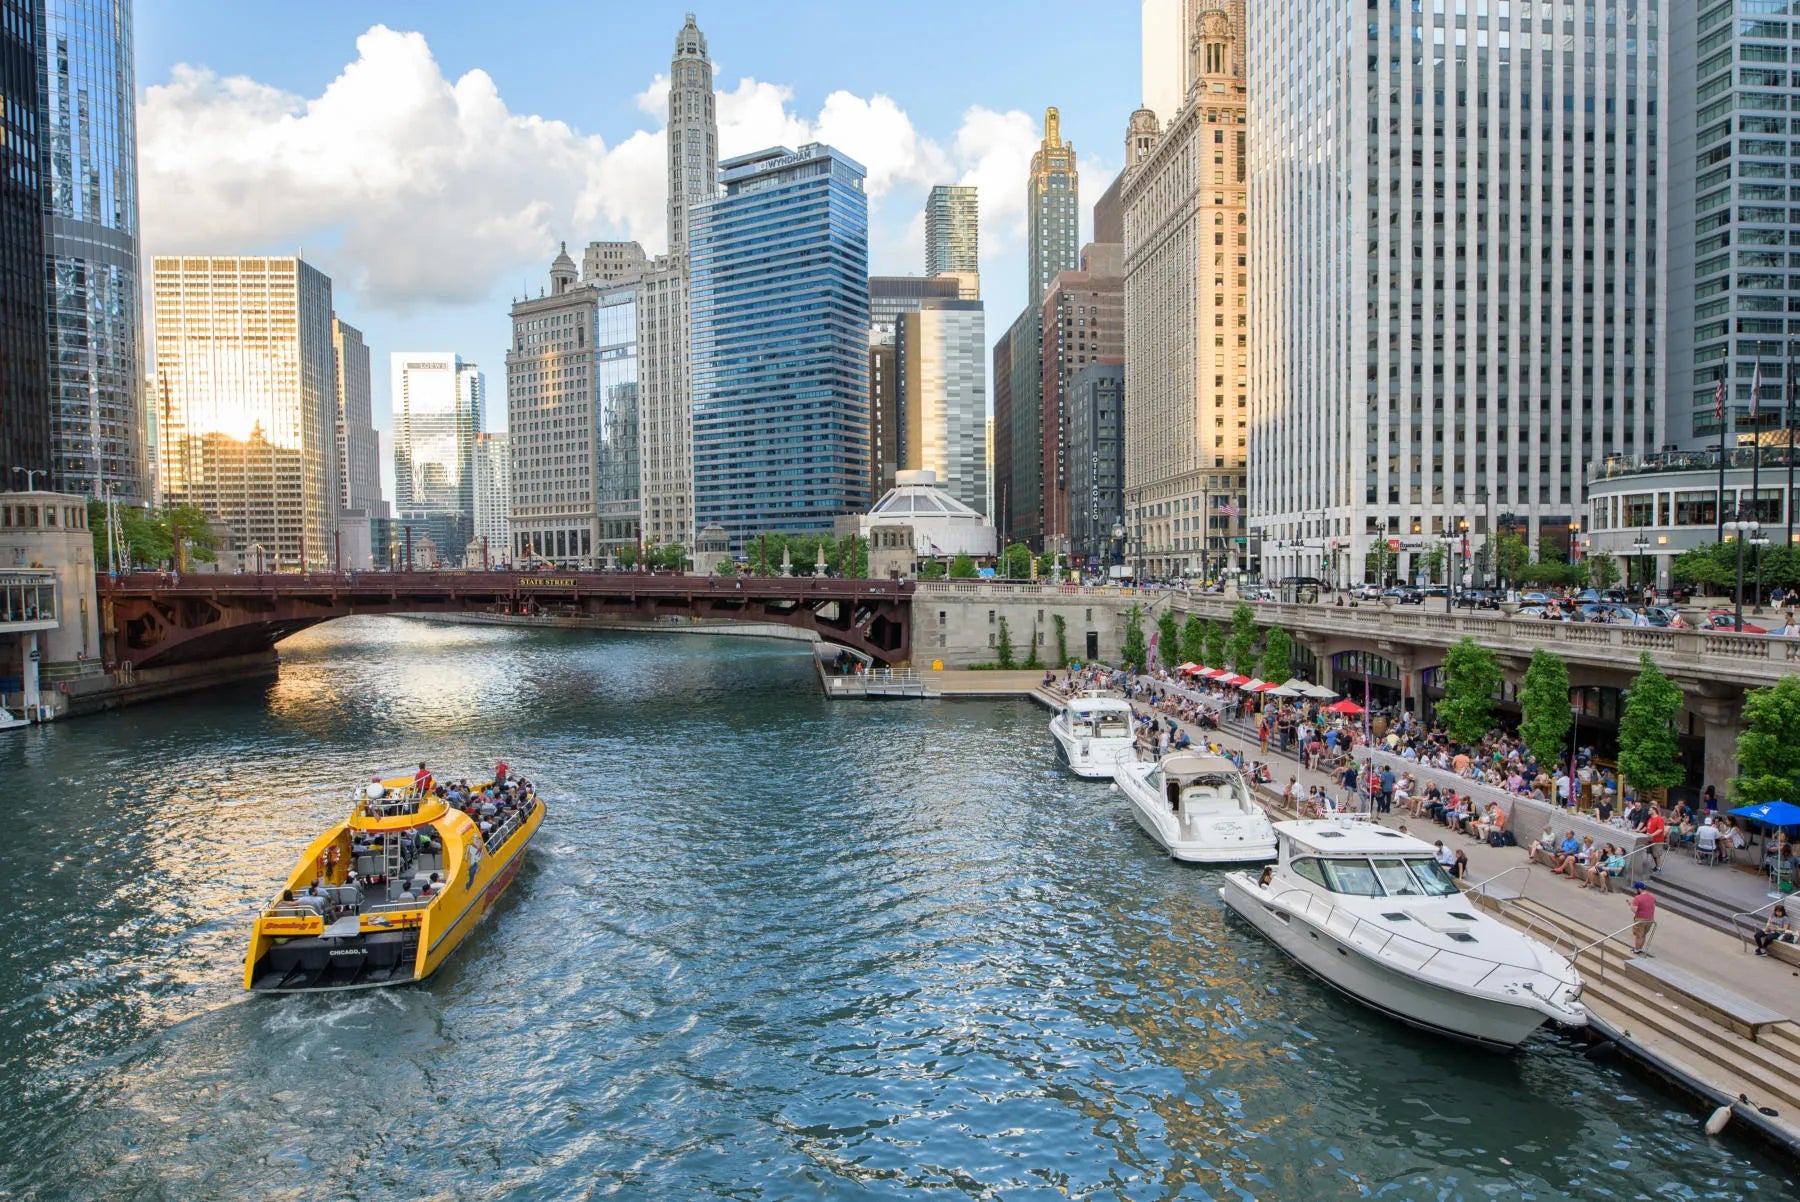 2. The Chicago Riverwalk/The Chicago River